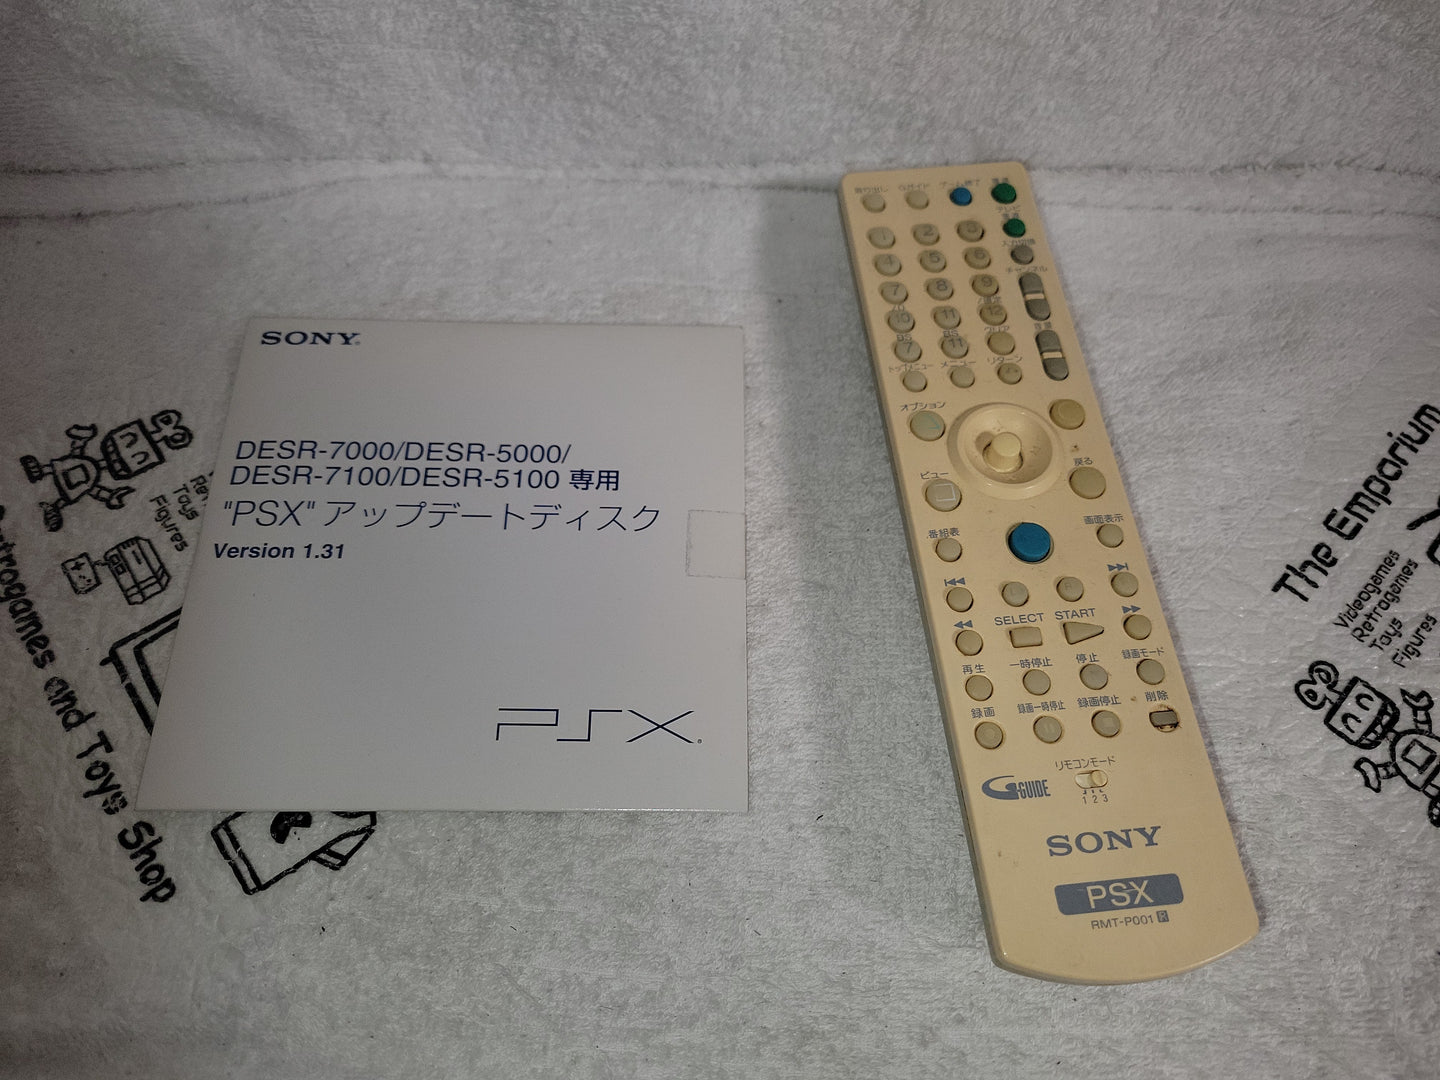 PSX remote control + Firmware update disc desr5000/7000 - sony playstation ps1 japan